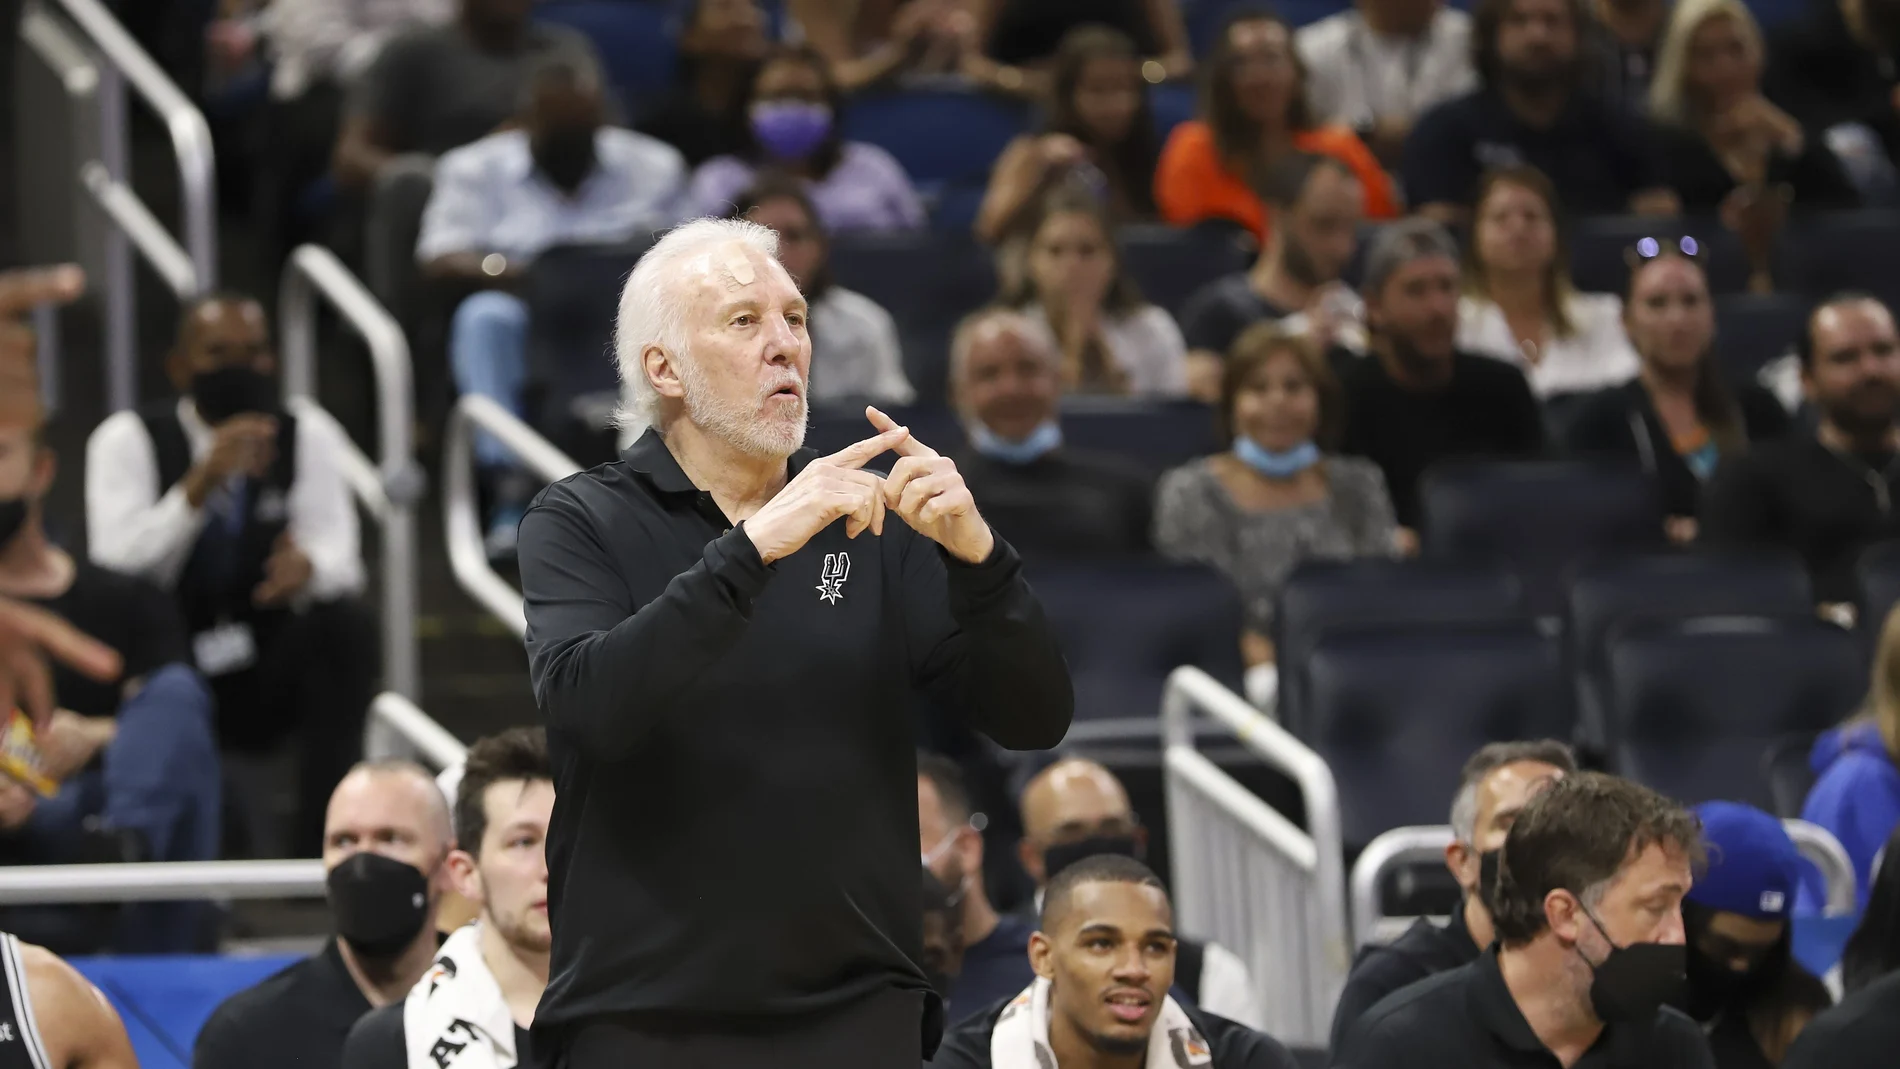 San Antonio Spurs coach Gregg Popovich calls in a play to his team during the second half of an NBA basketball game against the Orlando Magic, Sunday, Oct. 10, 2021, in Orlando, Fla. (AP Photo/Jacob M. Langston)